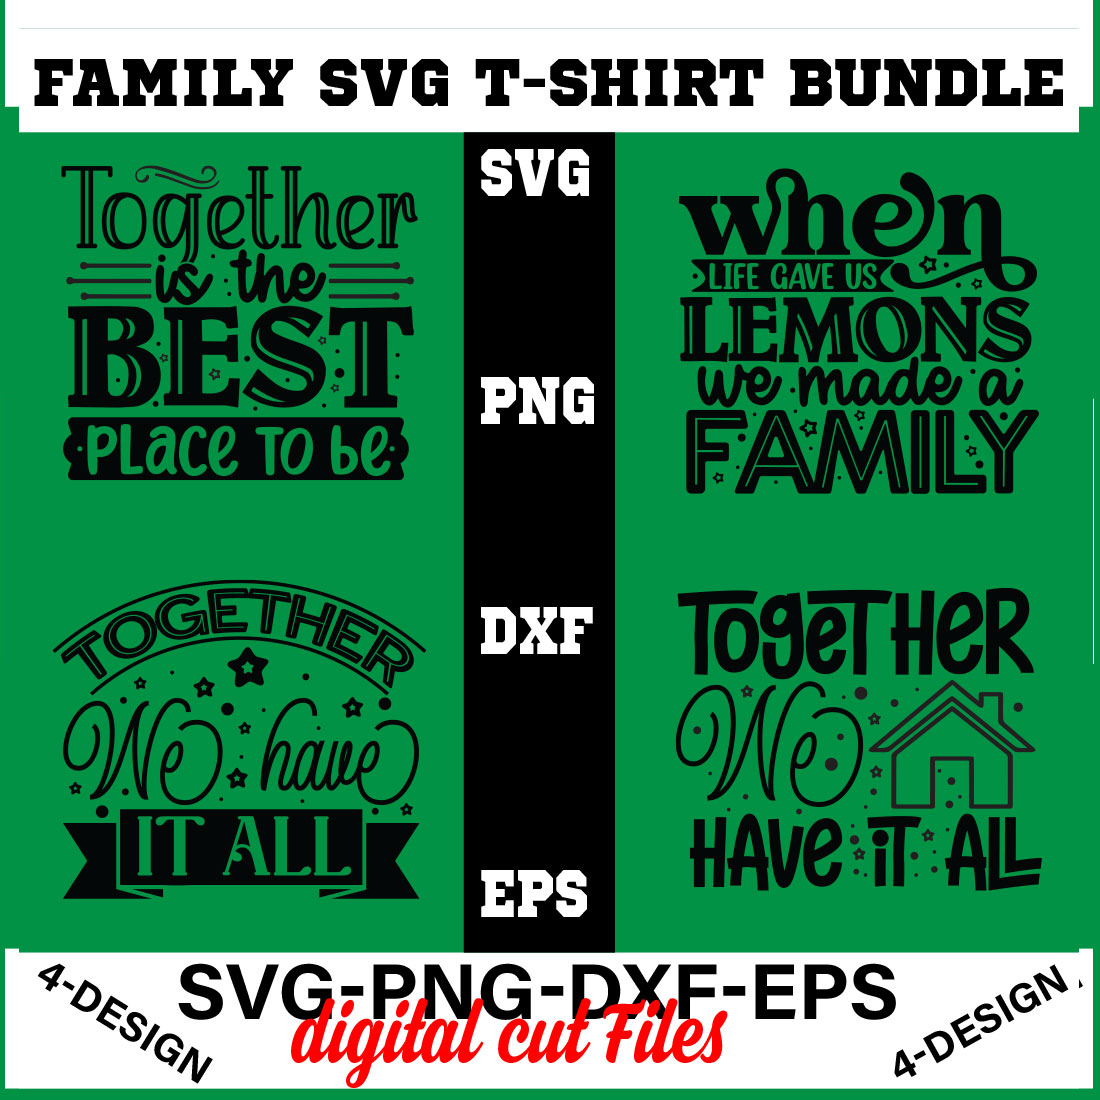 Family Quotes svg, Family svg Bundle, Family Sayings svg, Family Bundle svg Volume-07 cover image.